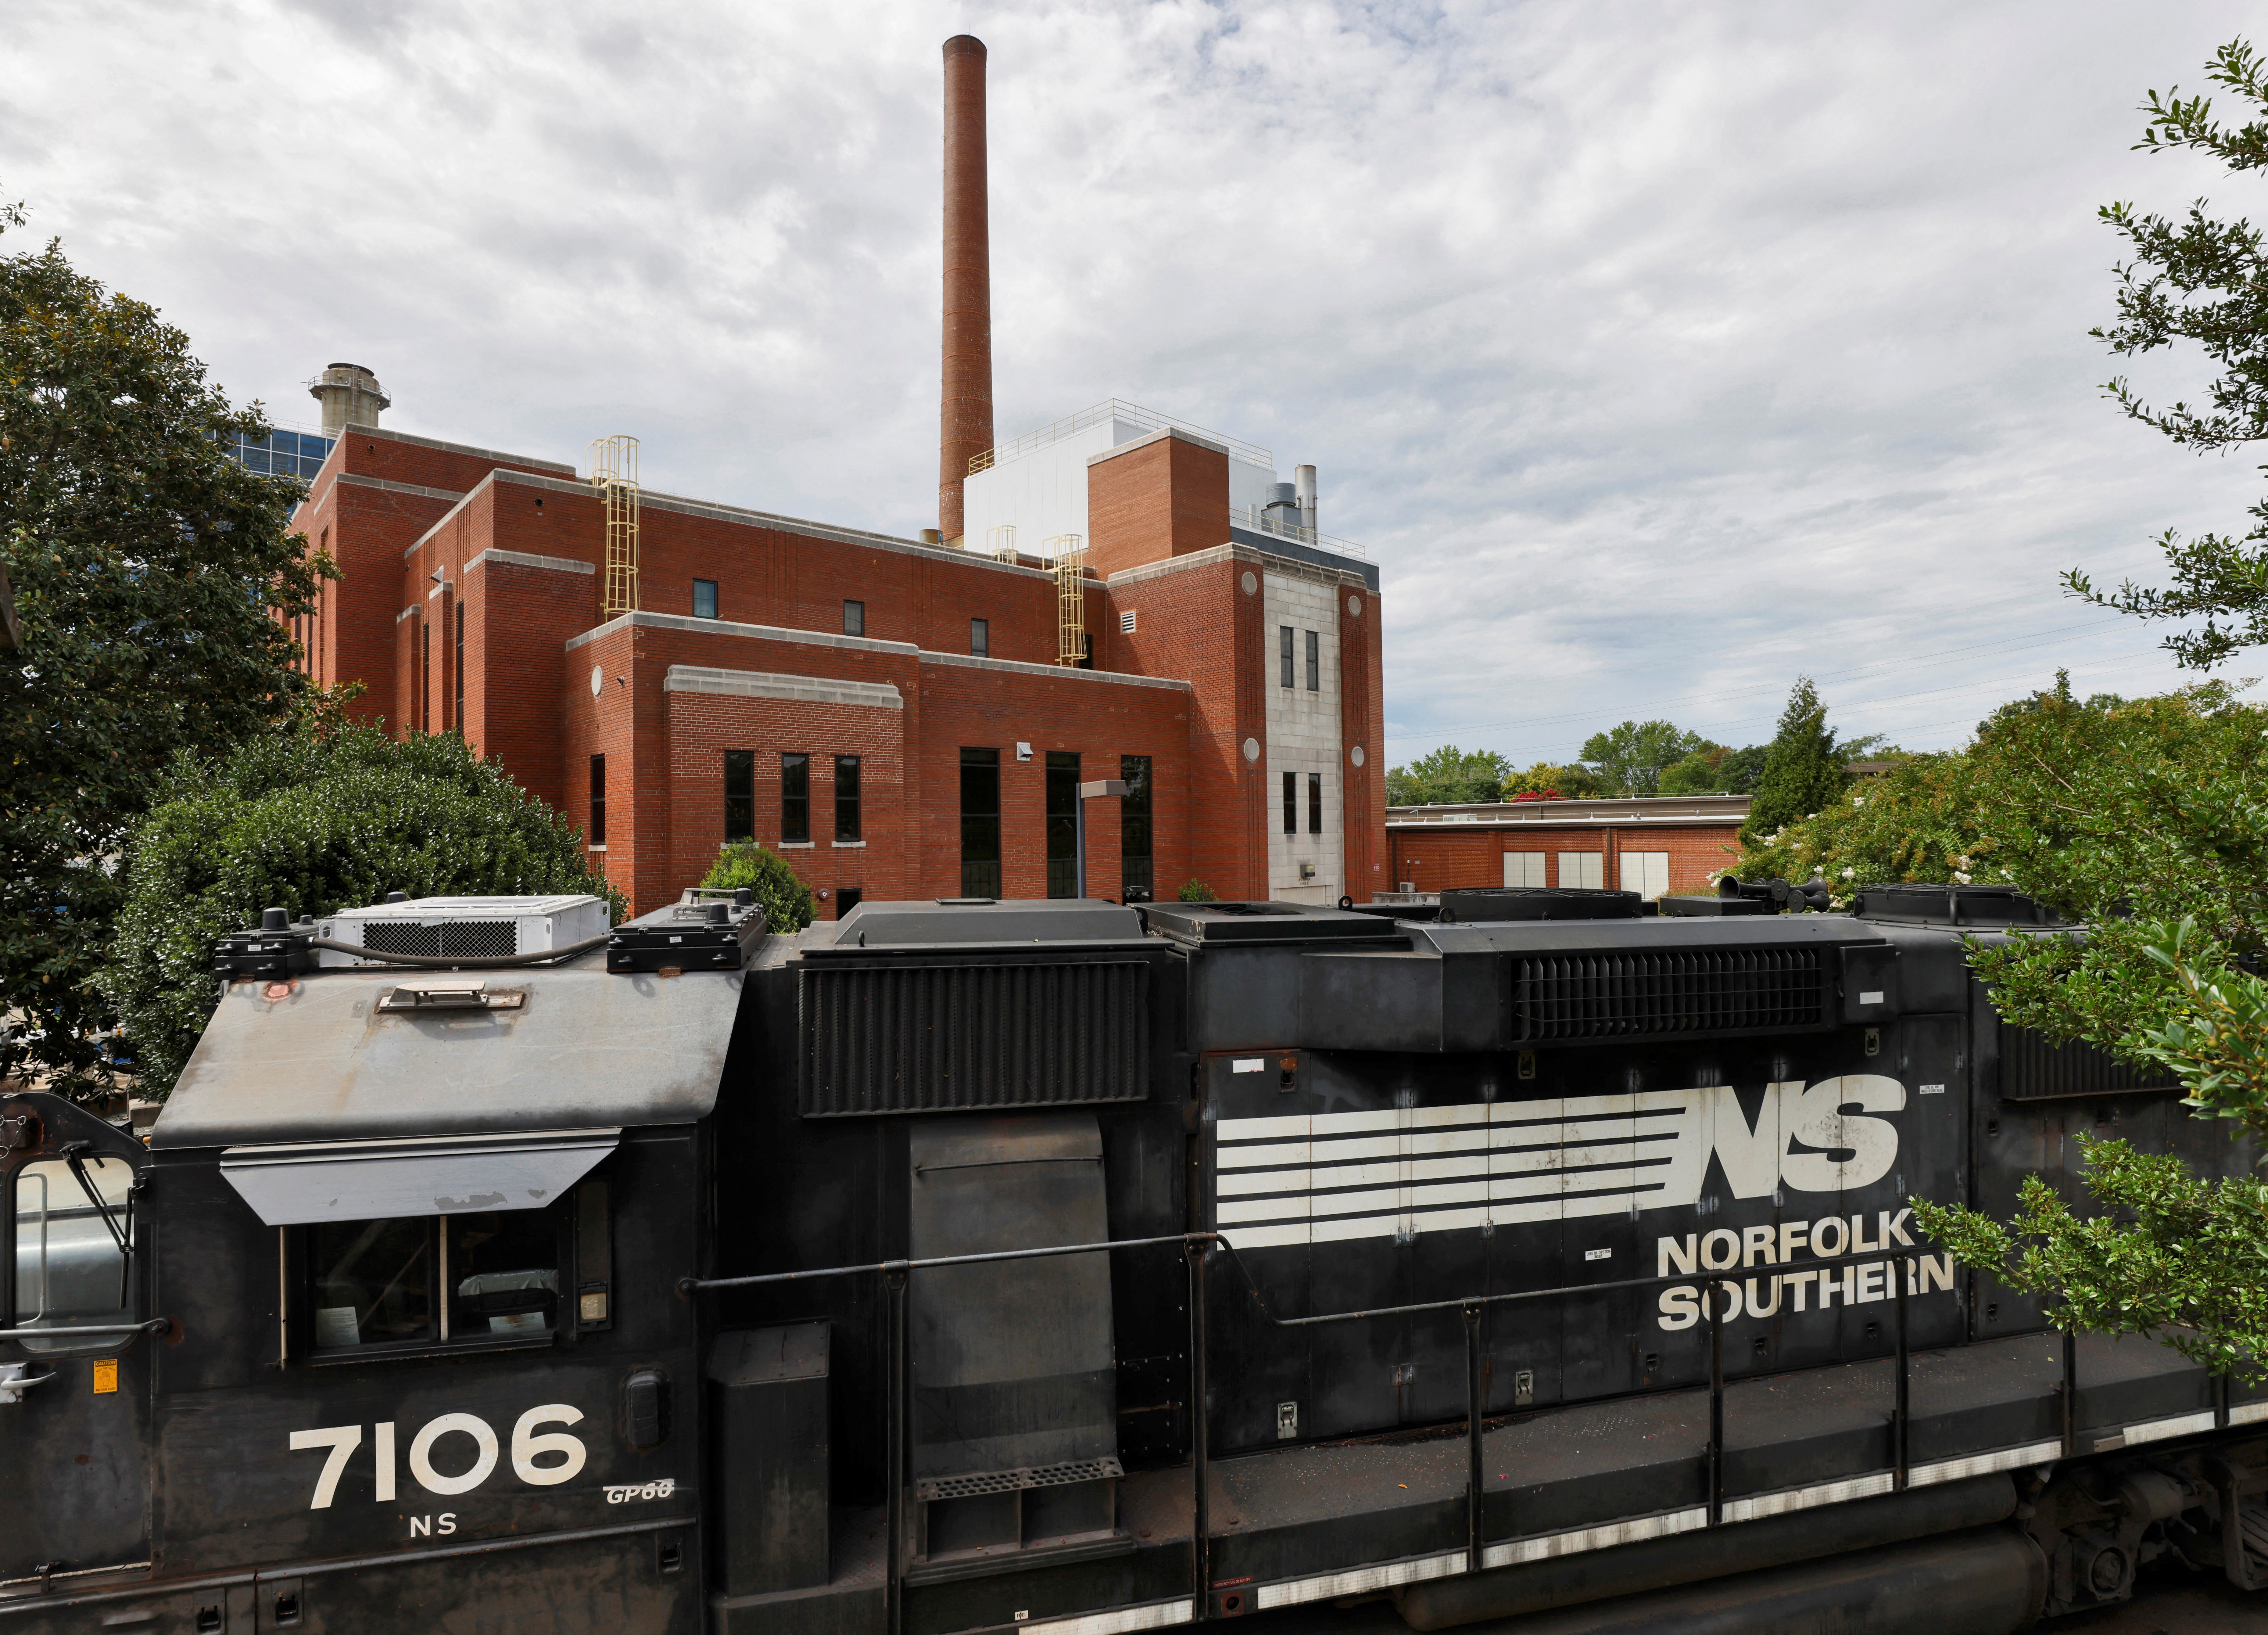 Norfolk Southern Train rests near the University of North Carolina's energy generation plant, after delivering coal, in Chapel Hill